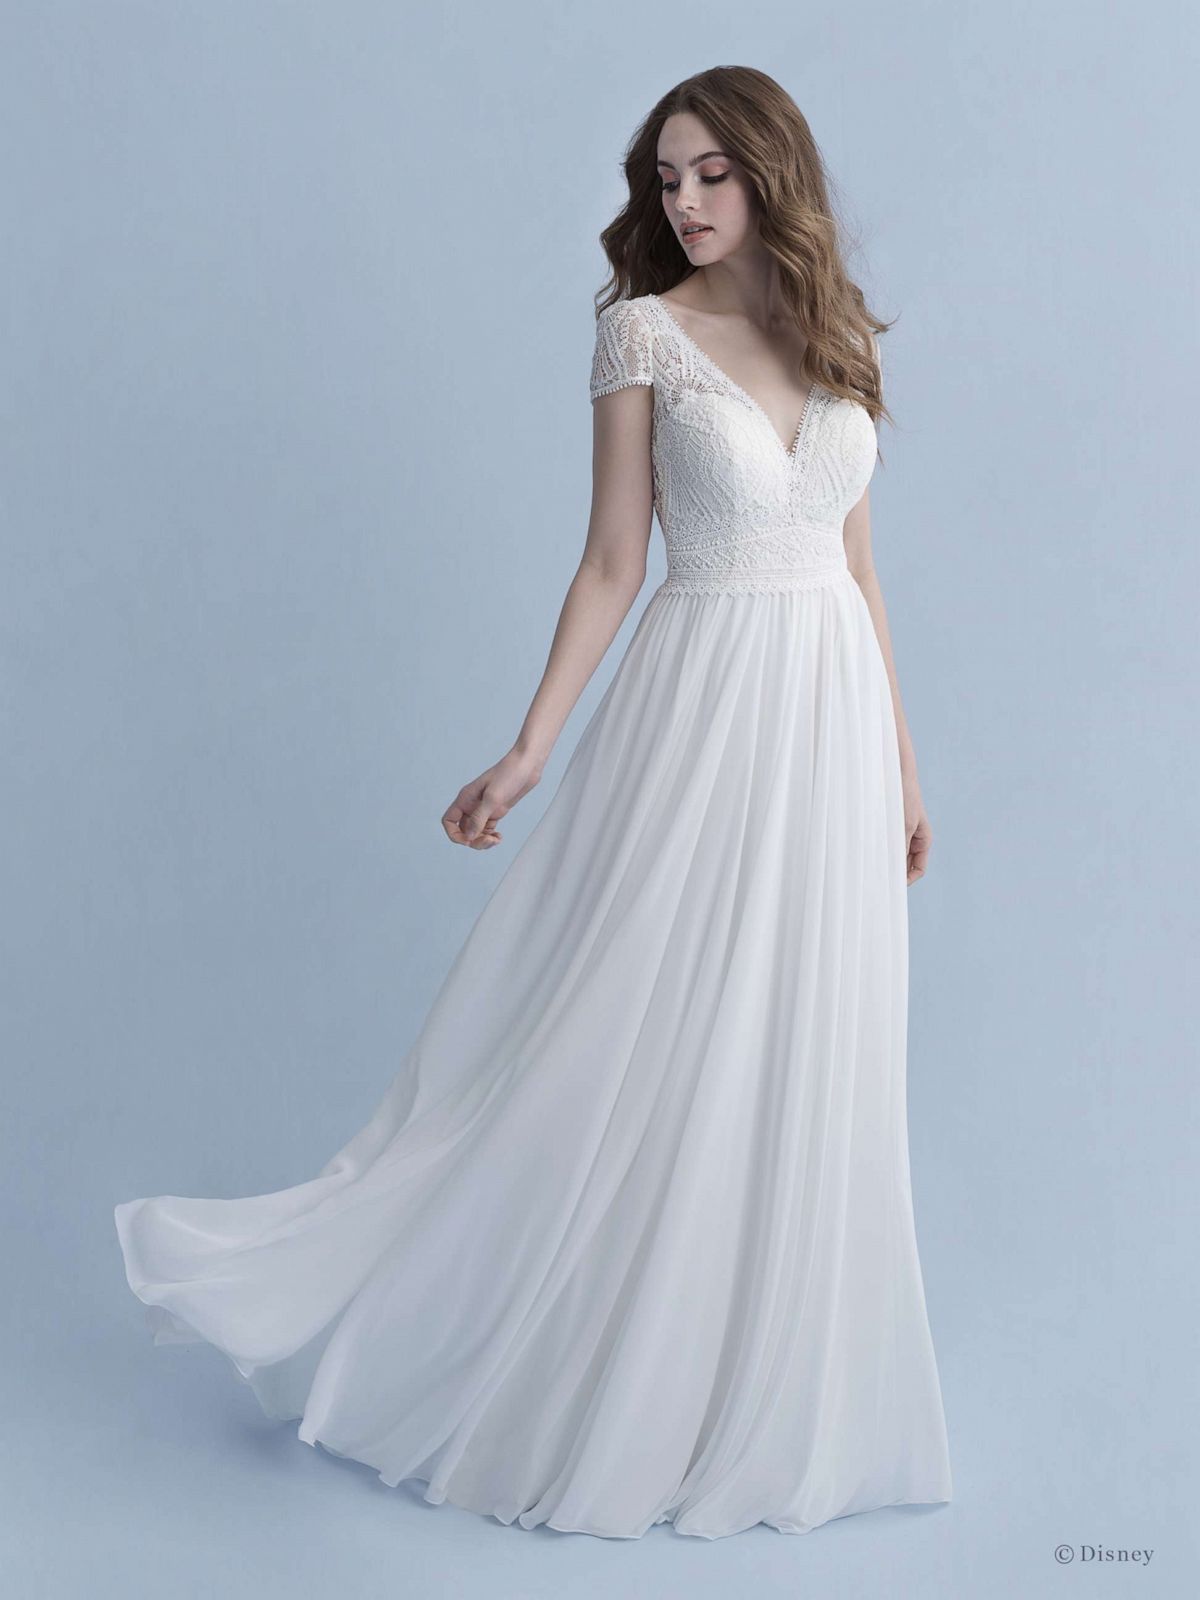 We Are Saying "I Do" To ALL Of The New Dresses In The